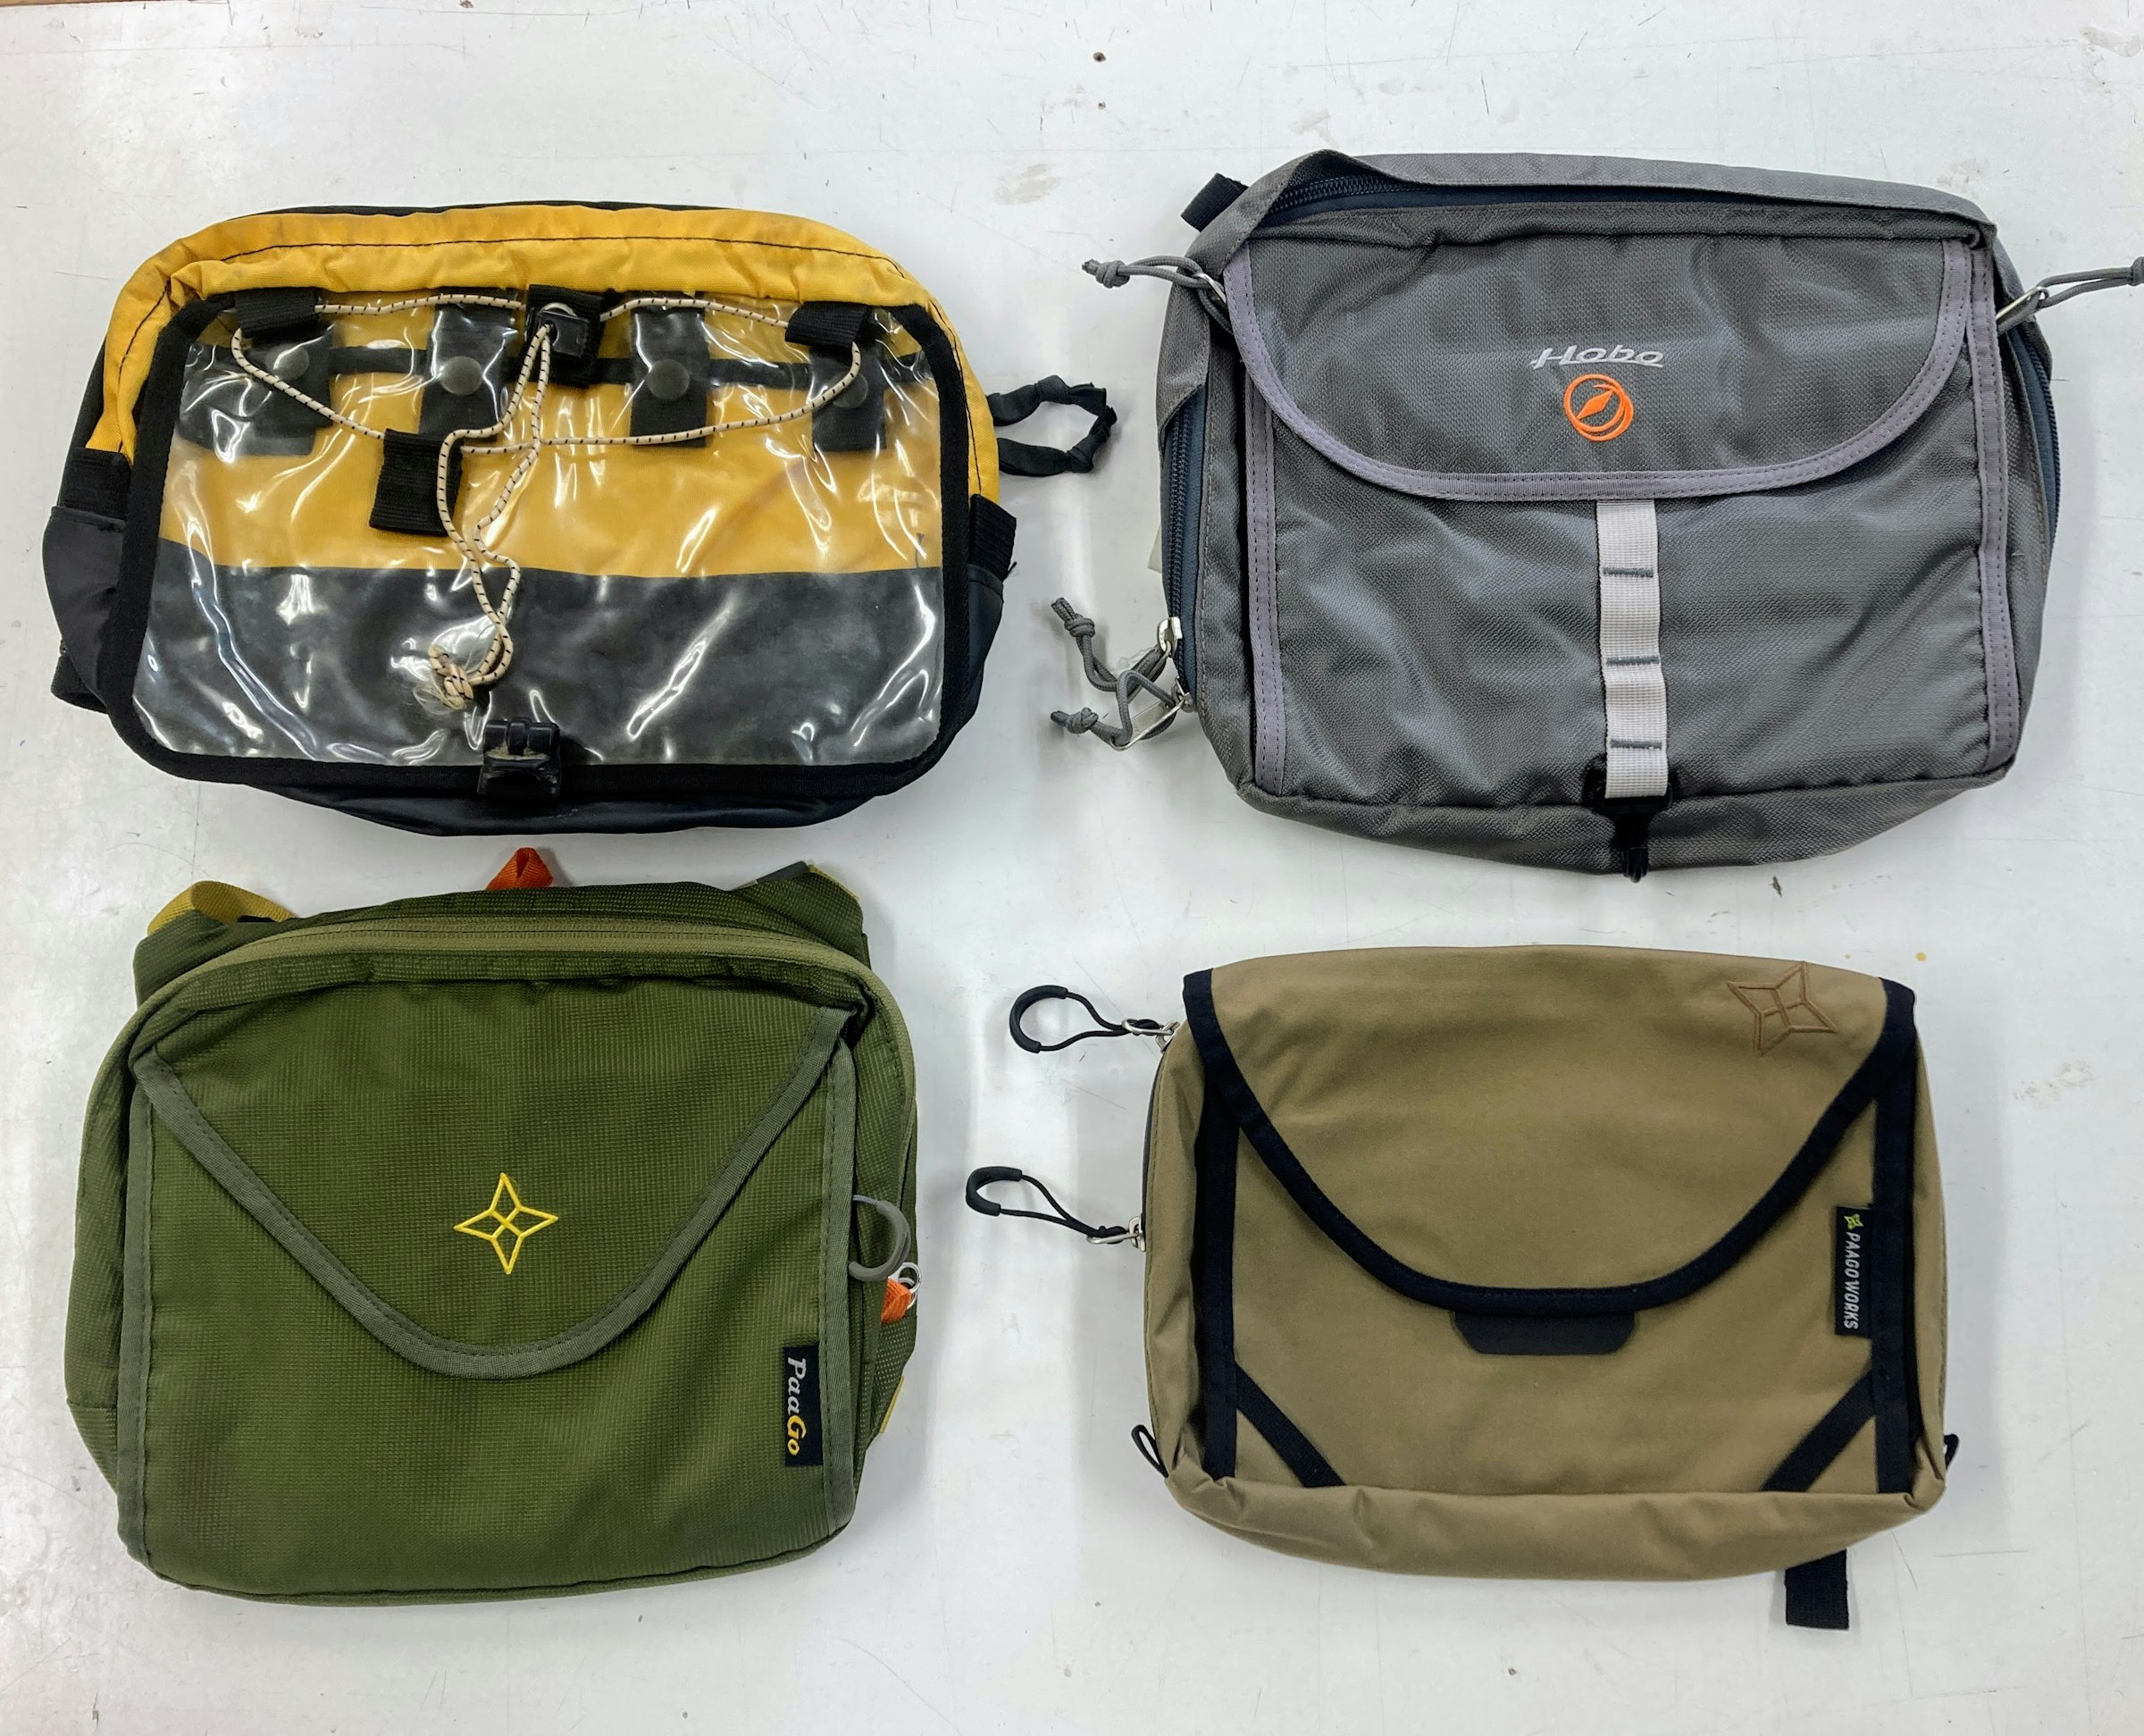 The chest bag handmade with a sewing machine for personal use is on the top left. The top right is the 'Pathfinder' chest bag that was productized when 'HOBO GREAT WORKS' was established in 2003. The same named chest bag has been evolved in 'PAAGOWORKS', which was launched in 2011 (the two at the bottom).